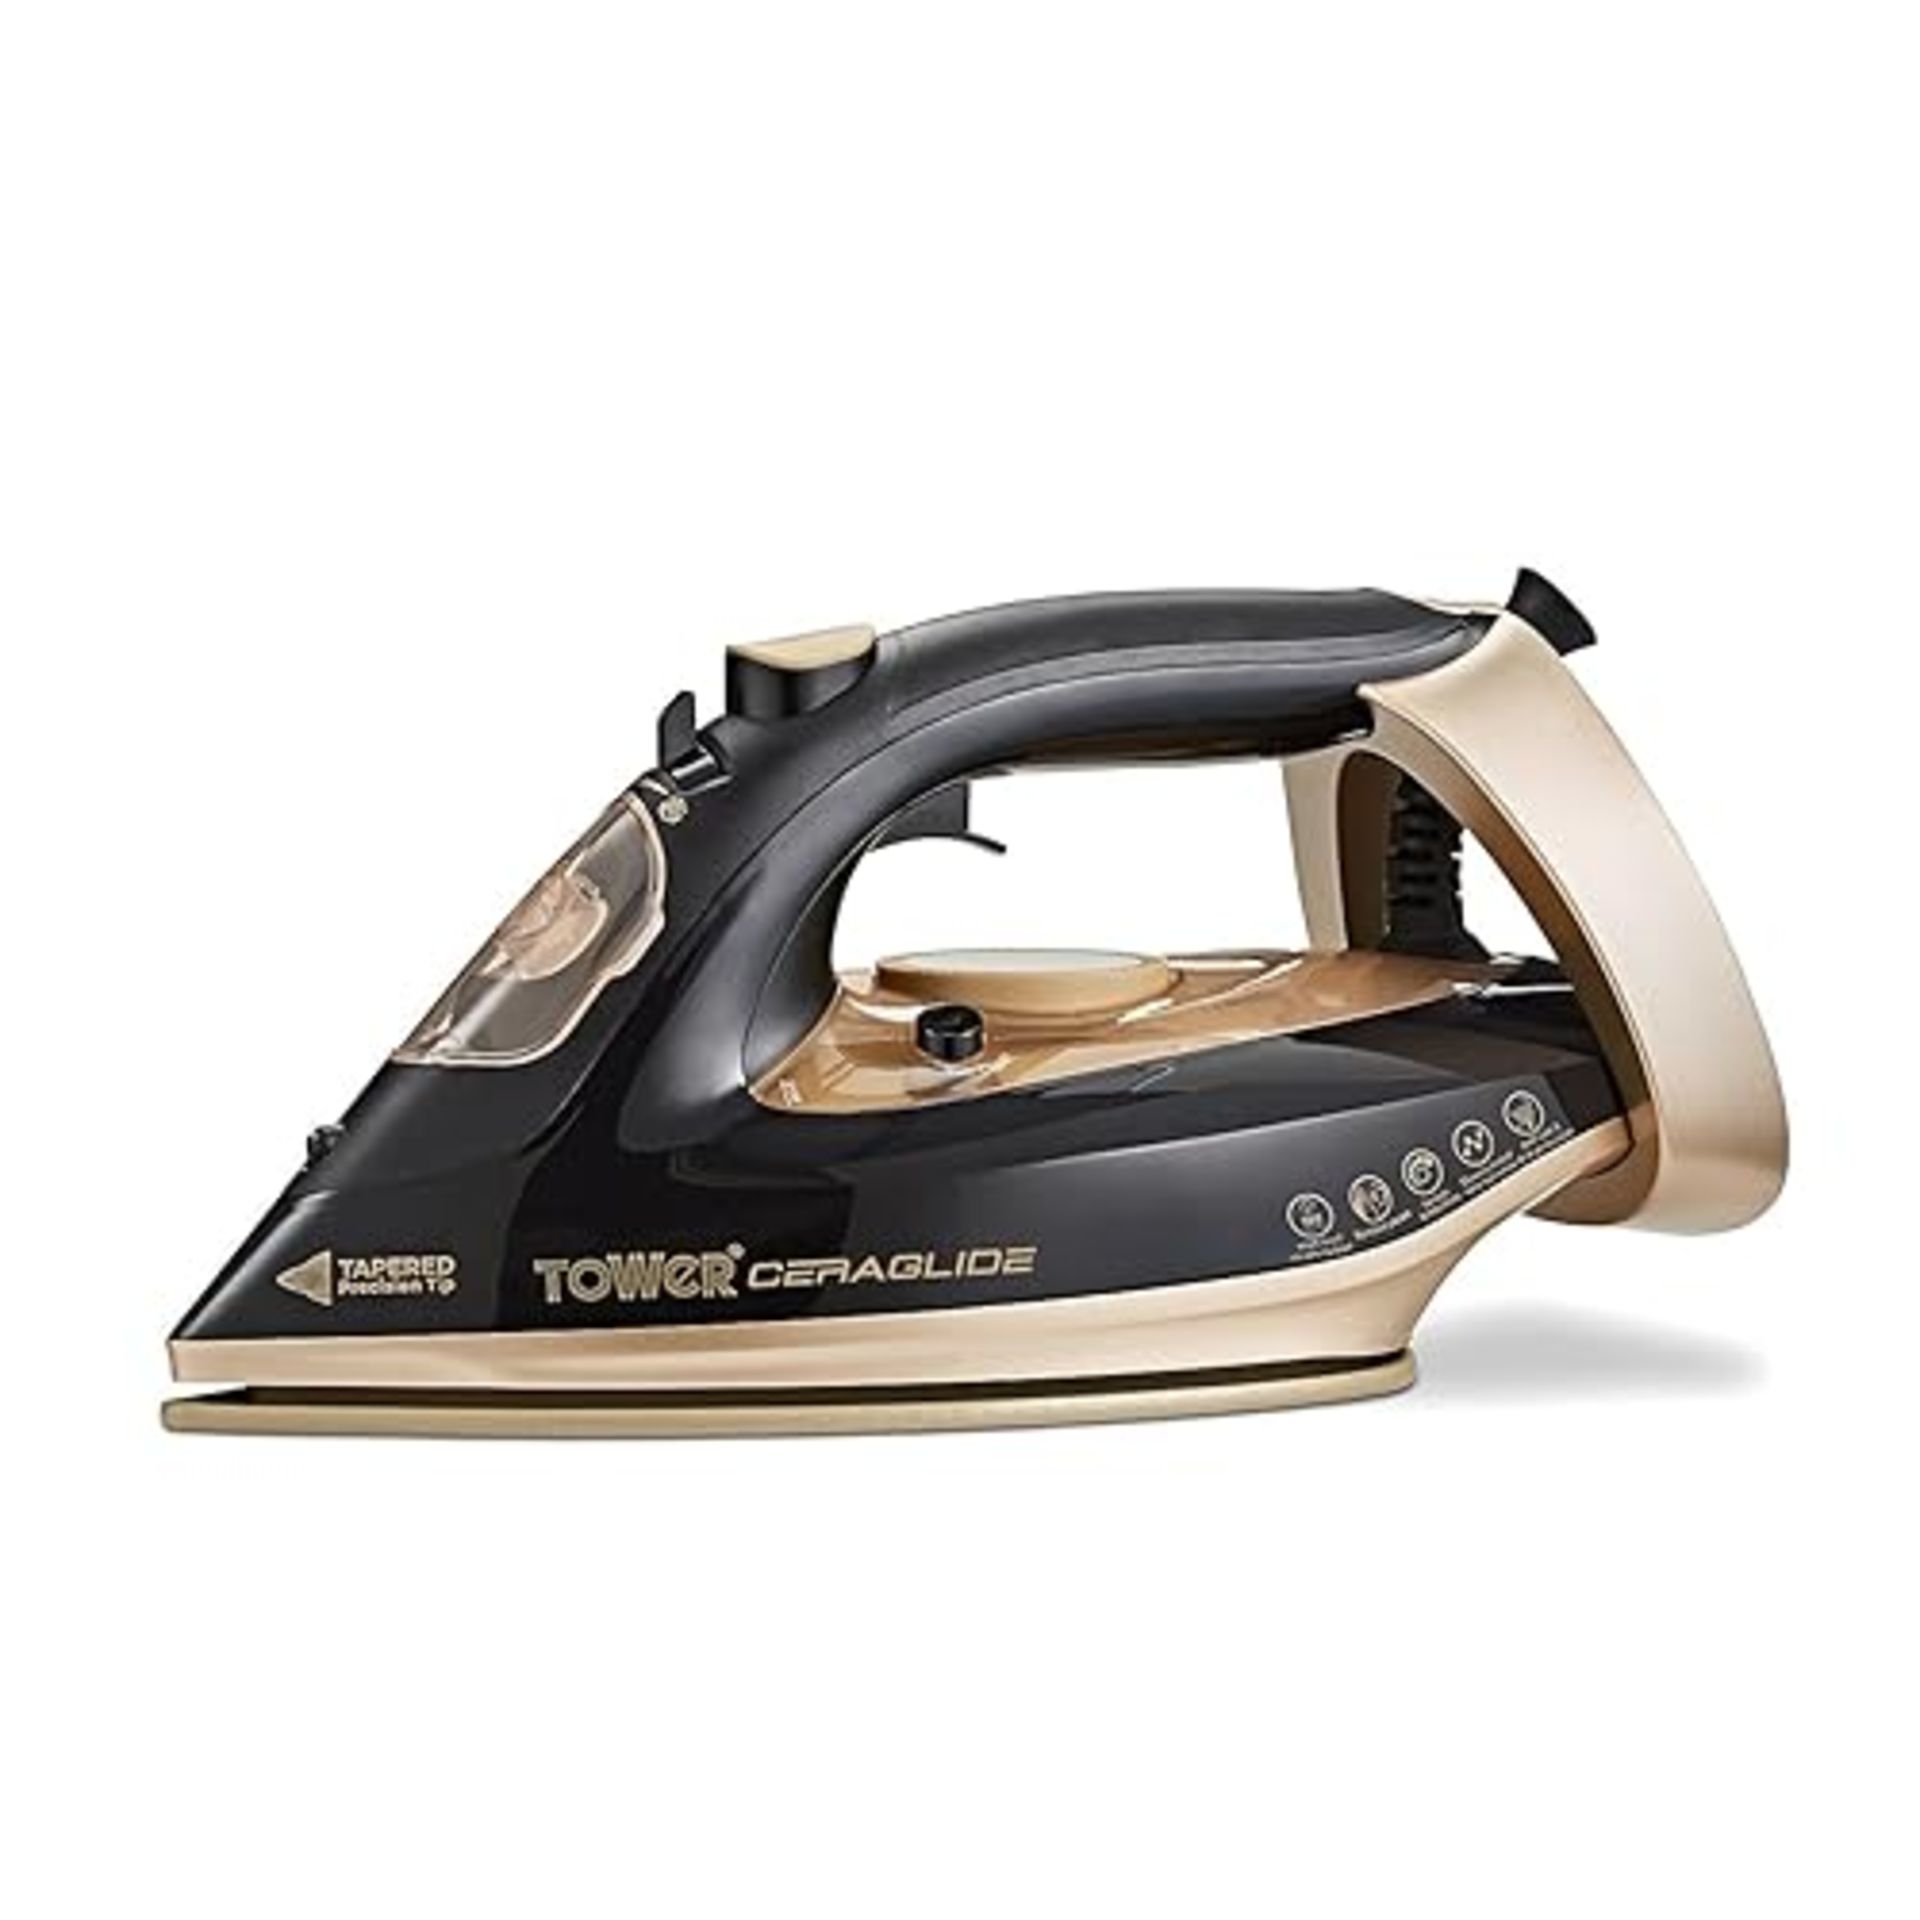 Tower T22021GLD Ceraglide Steam Iron with Fast Heat-Up, Extra Long 3 Metre Power Cord, 3100W, Black